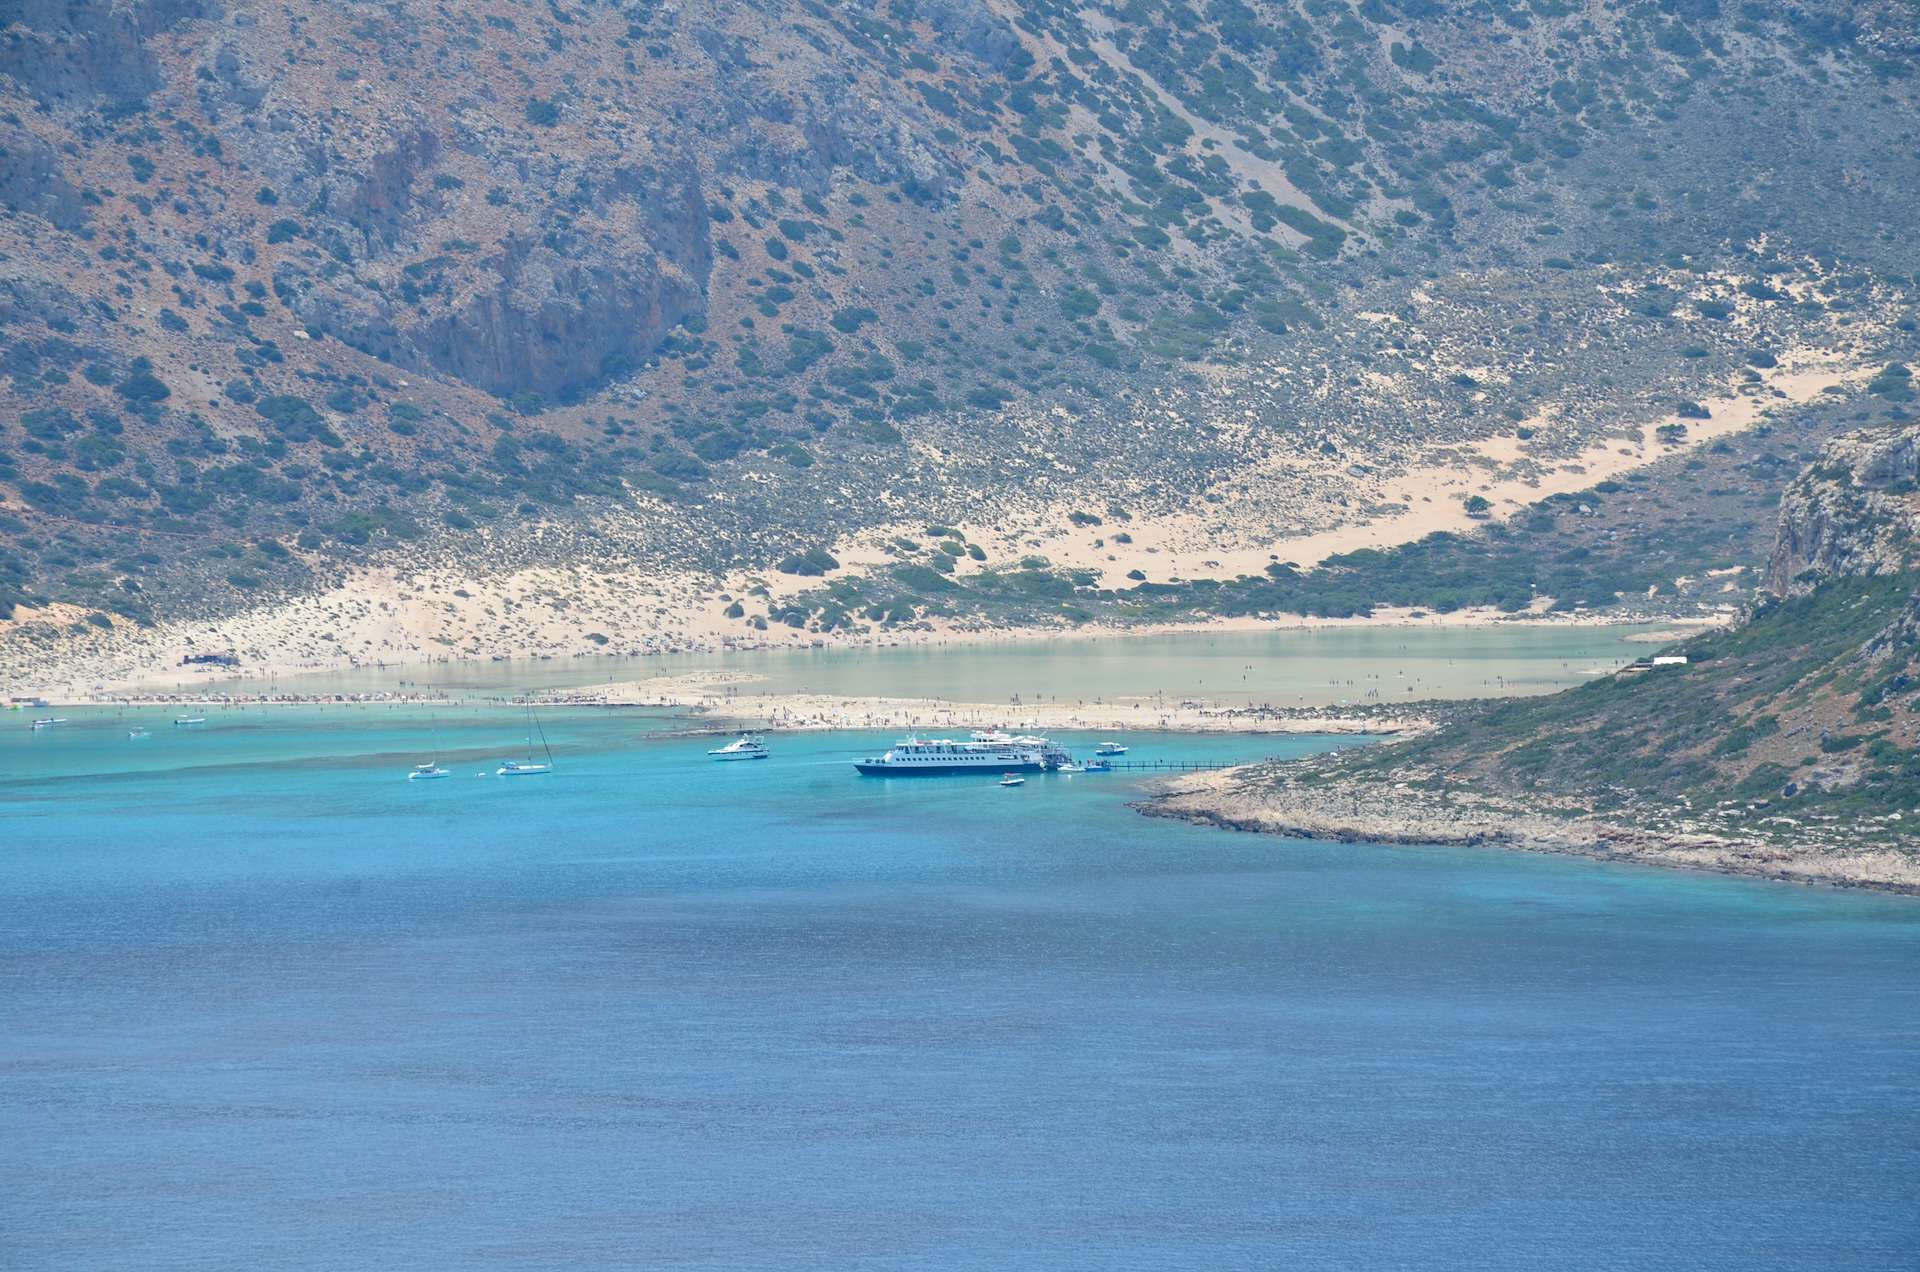 Balos Beach from the flagpole at the Venetian fortress on Gramvousa, Crete